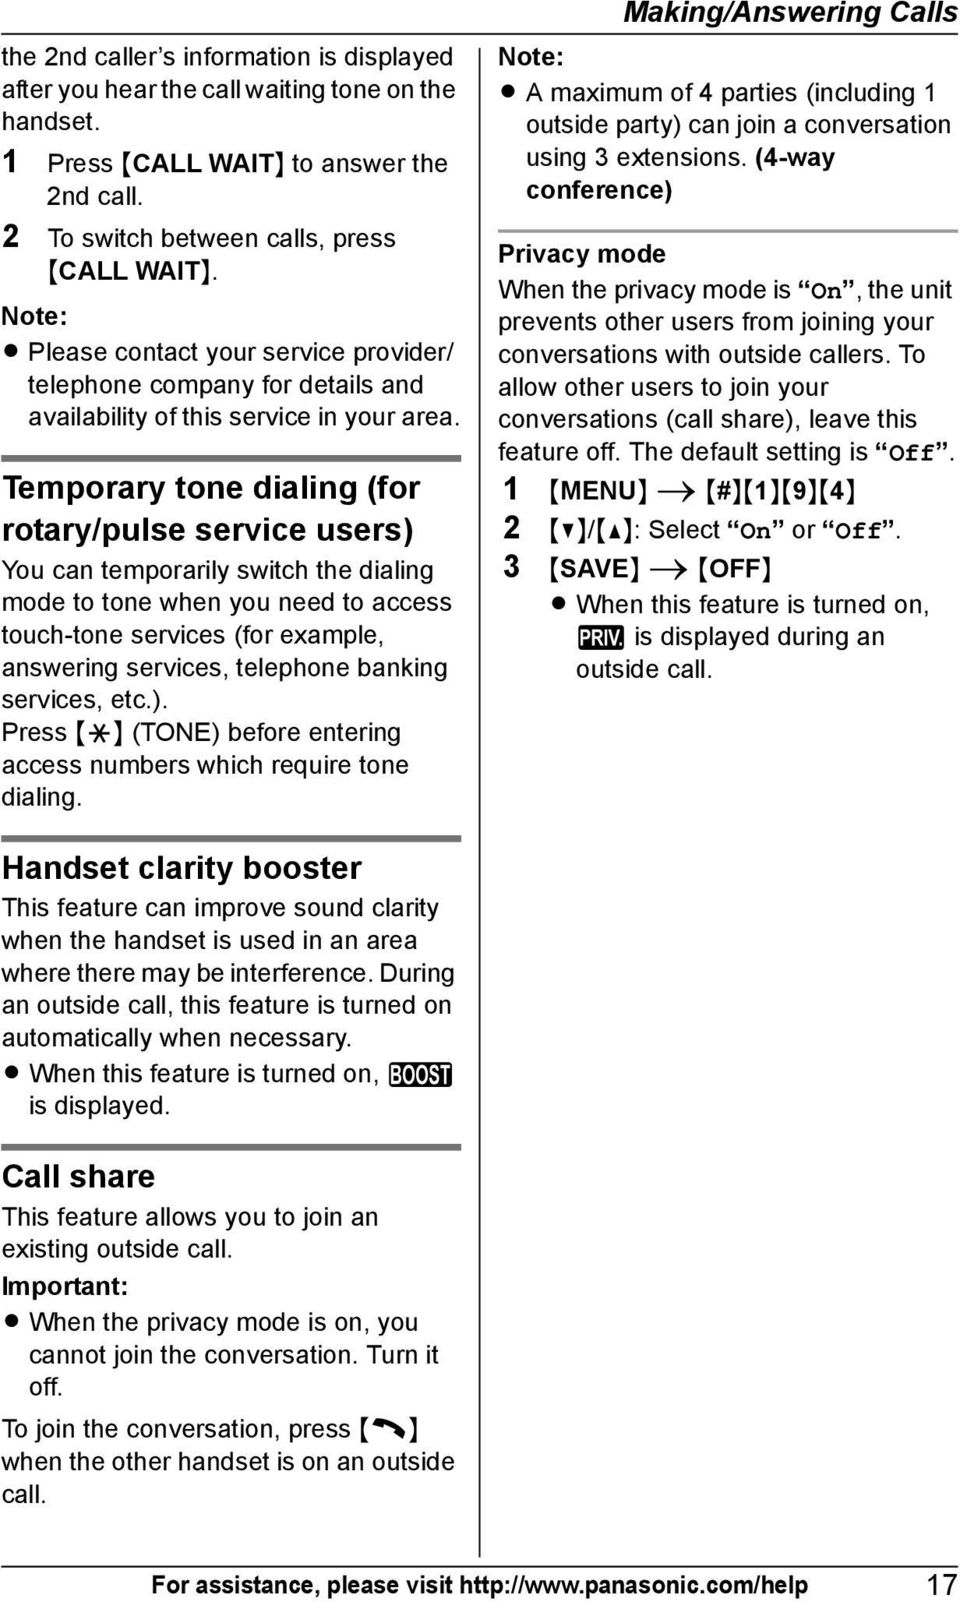 Temporary tone dialing (for rotary/pulse service users) You can temporarily switch the dialing mode to tone when you need to access touch-tone services (for example, answering services, telephone